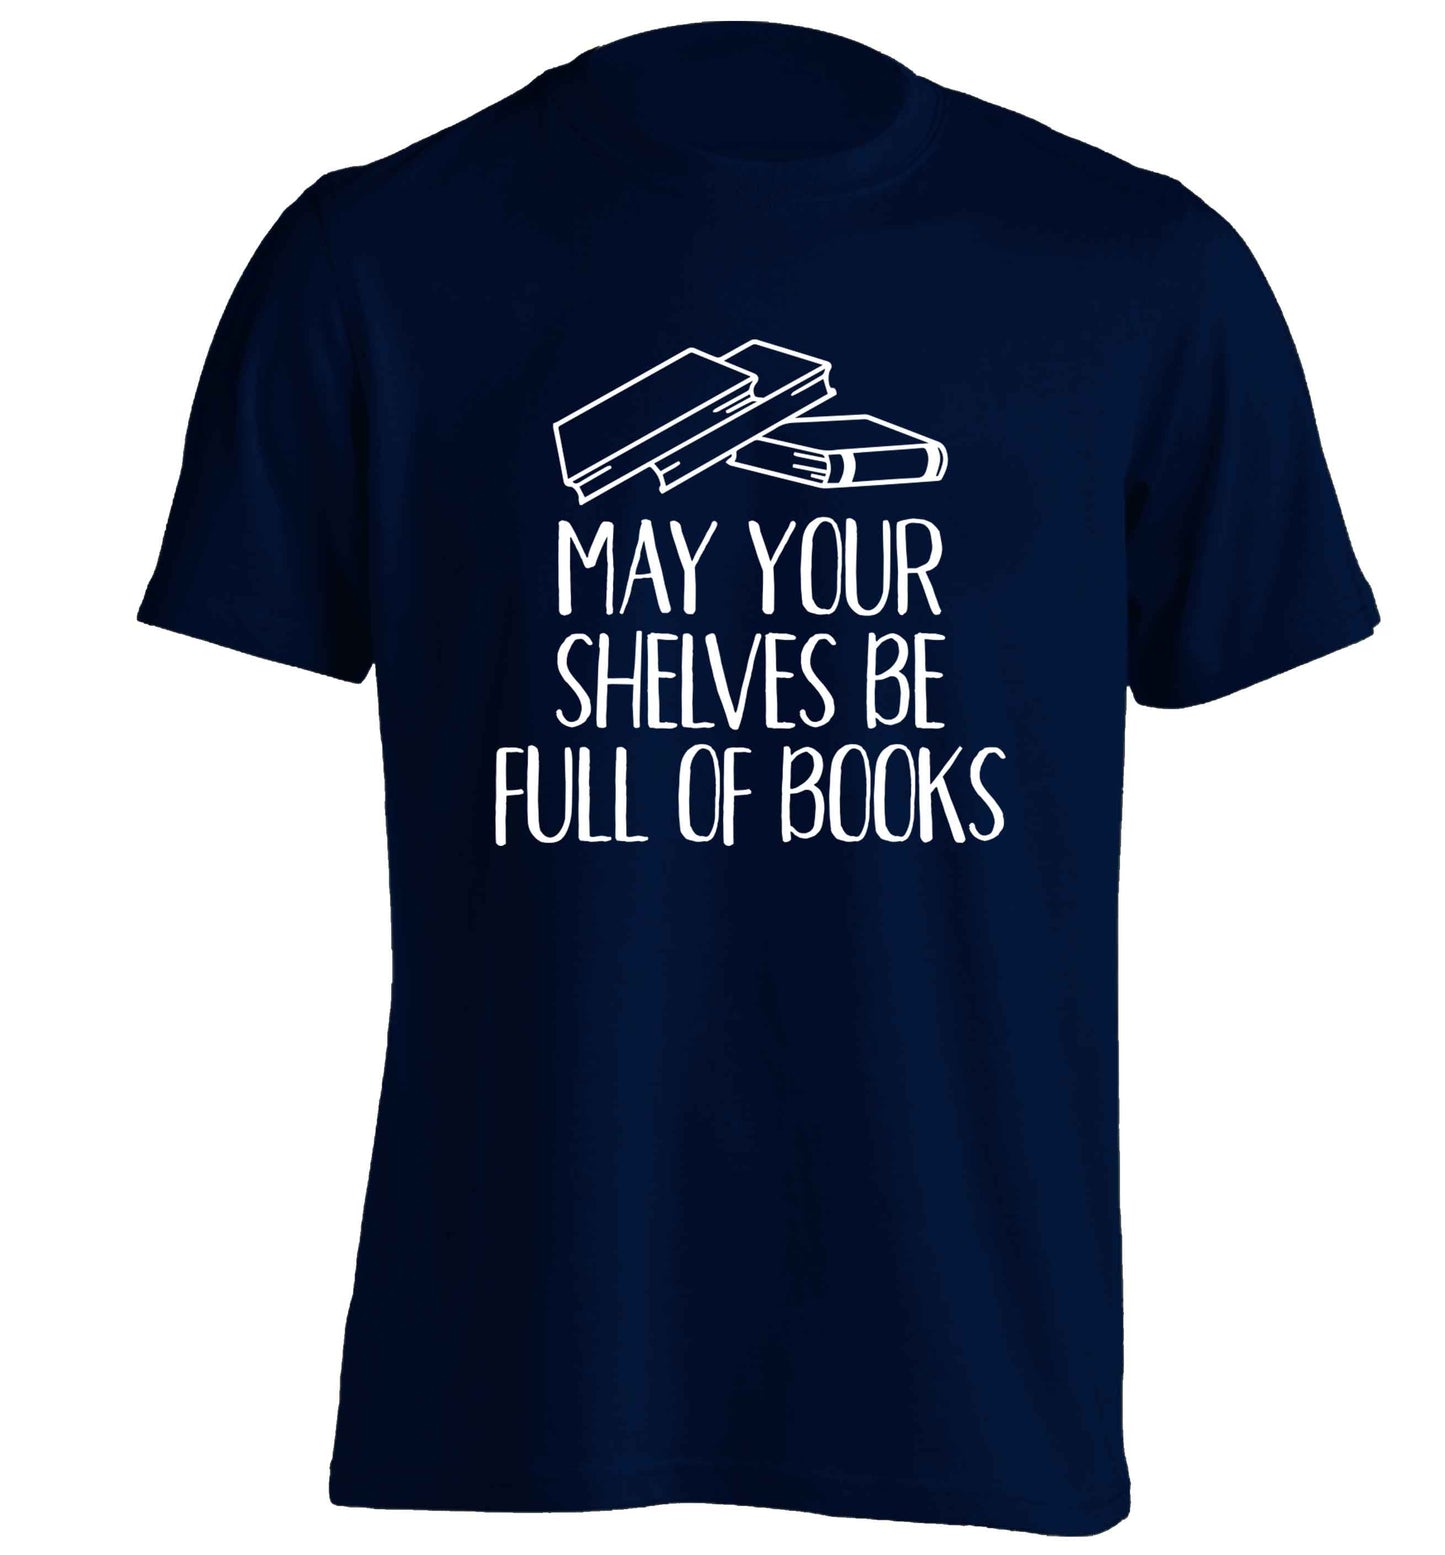 May your shelves be full of books adults unisex navy Tshirt 2XL